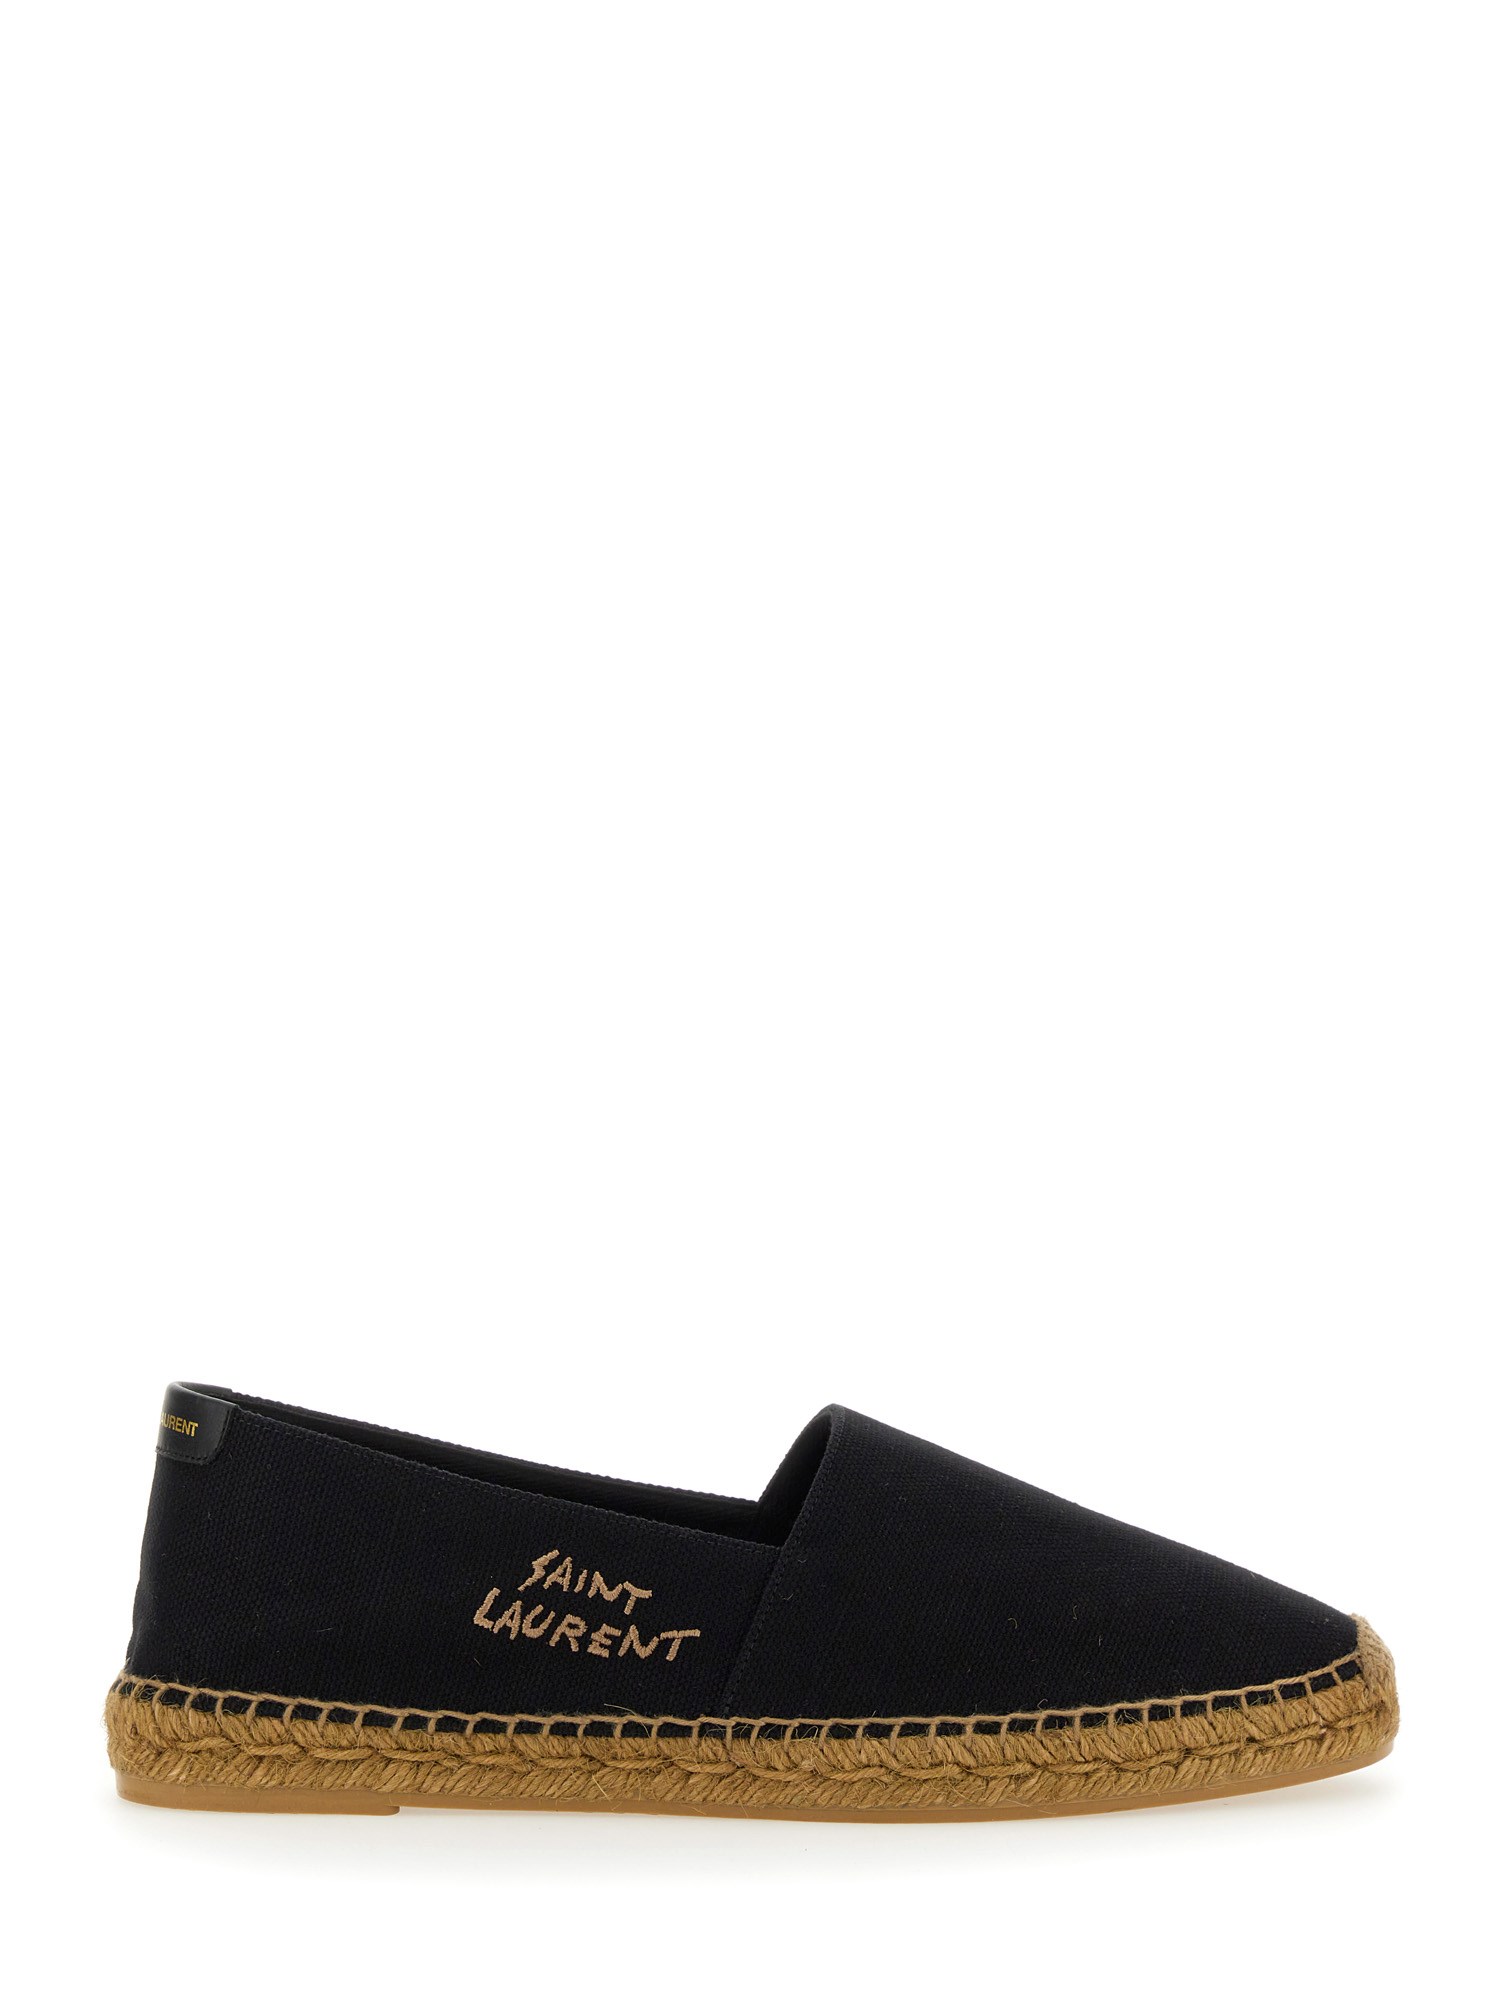 saint laurent espadrille with embroidered logo